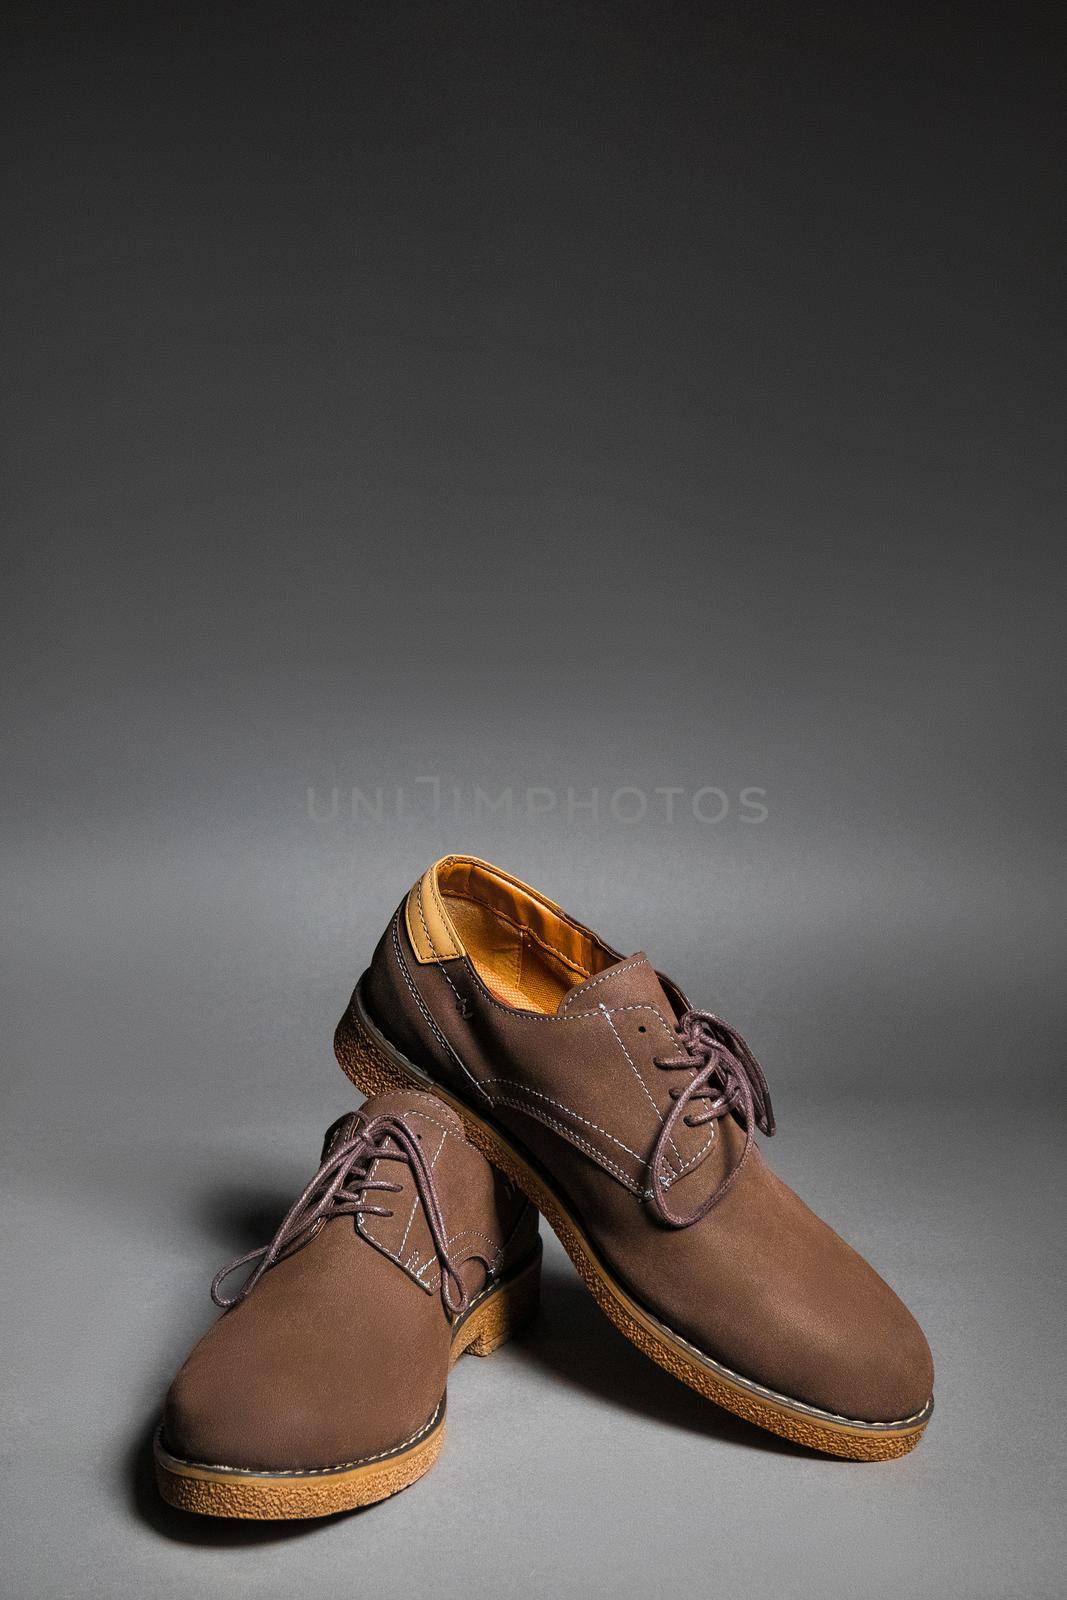 Brown suede shoes on a grey background with vertical copy space.